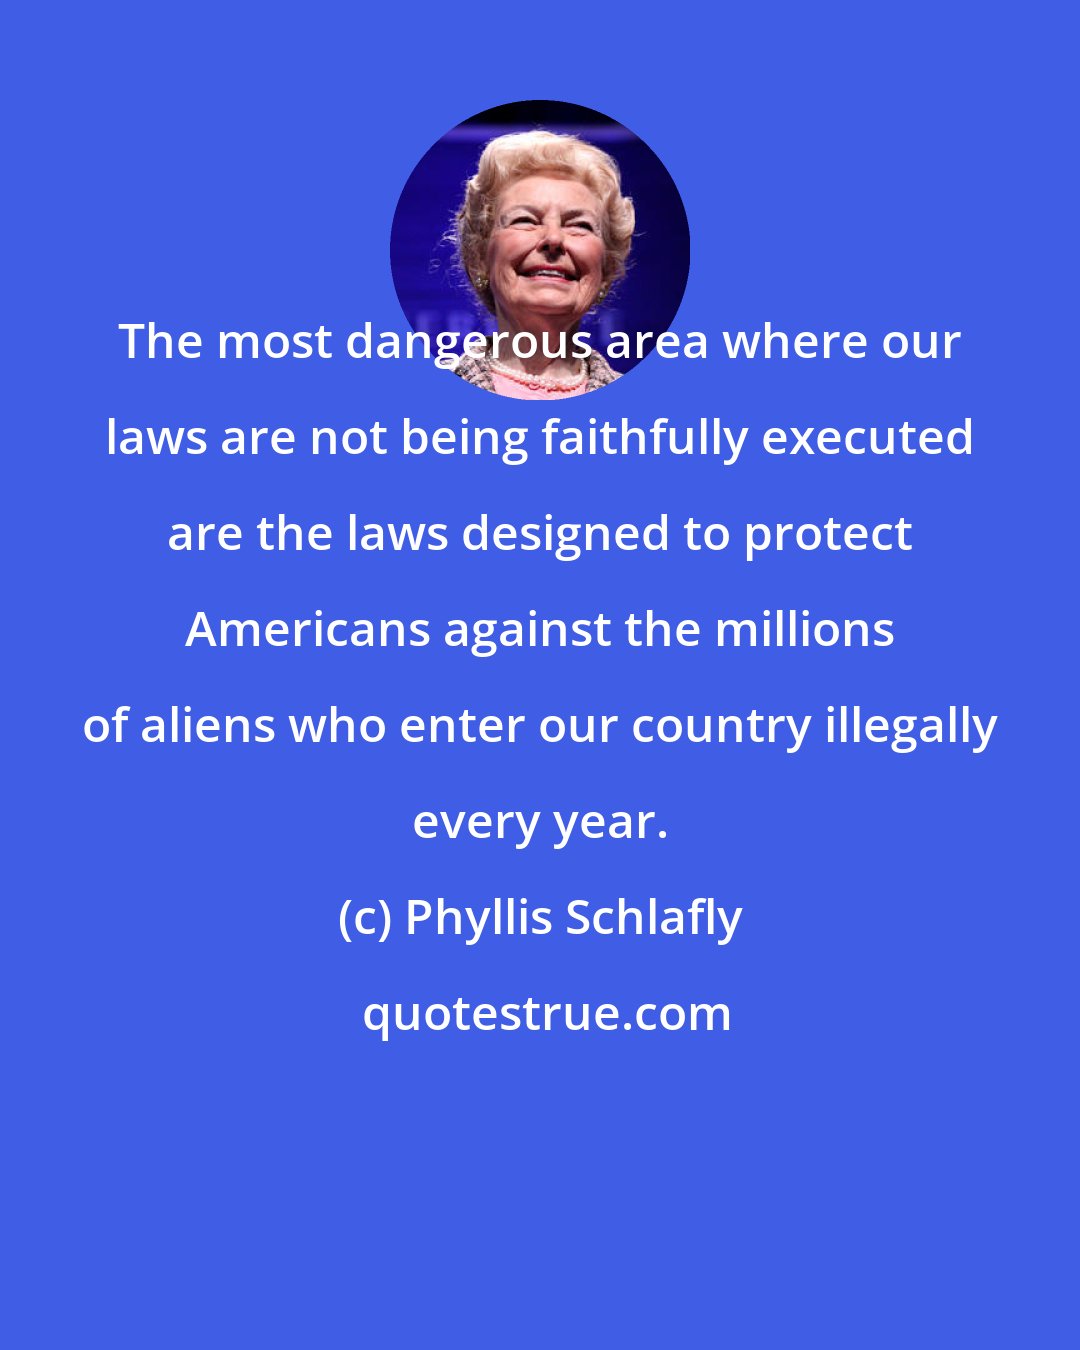 Phyllis Schlafly: The most dangerous area where our laws are not being faithfully executed are the laws designed to protect Americans against the millions of aliens who enter our country illegally every year.